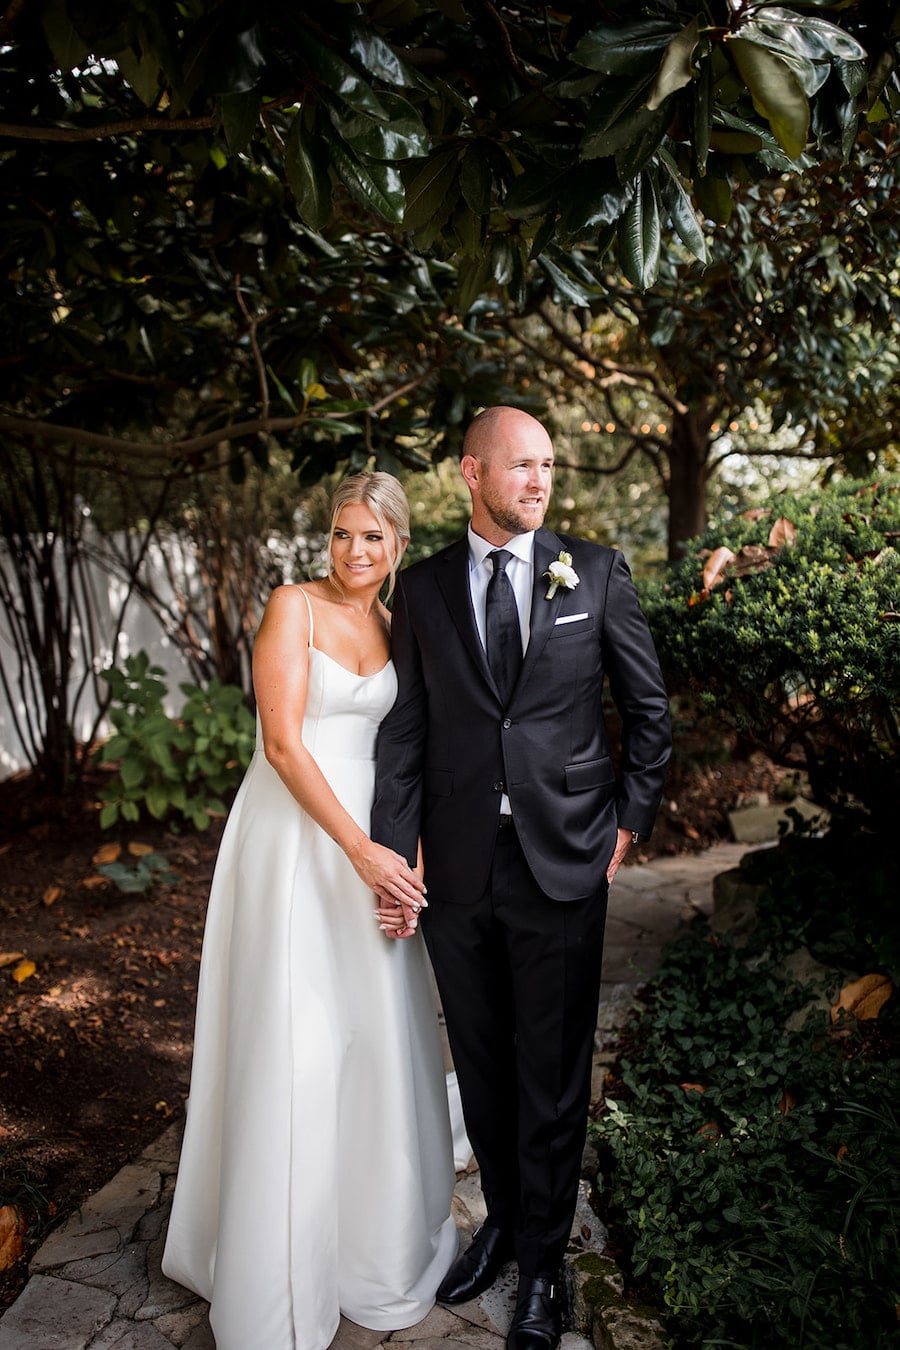 Nashville Wedding Venue That’s Perfect for Outdoor Ceremony And Reception With Neutral Colors